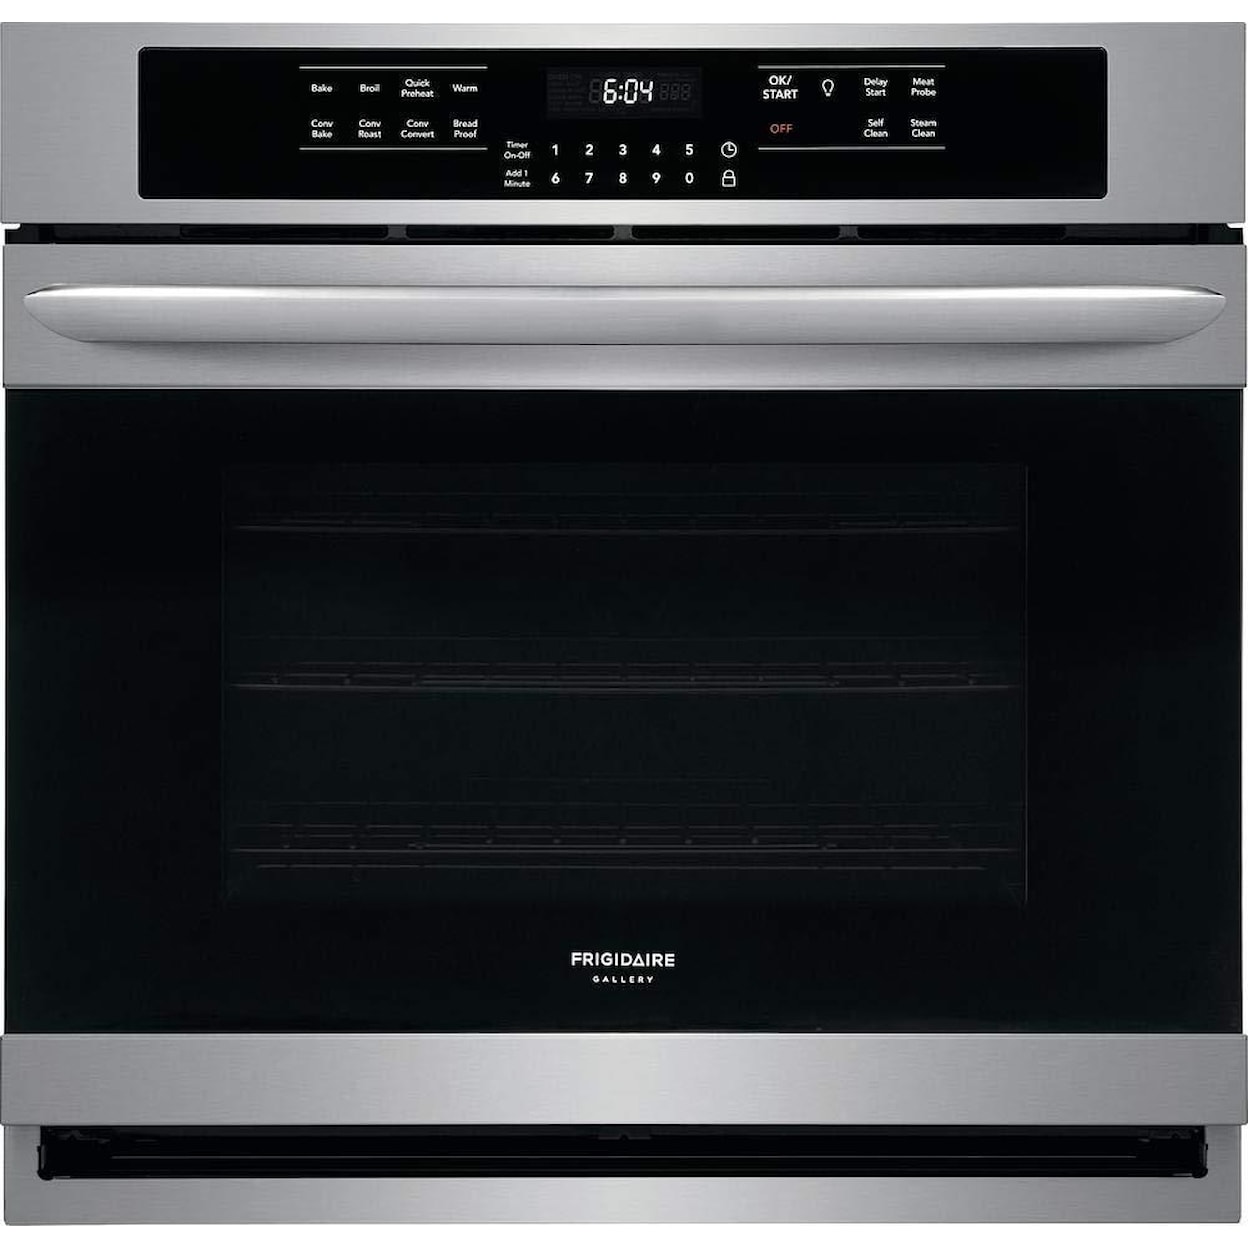 Frigidaire WALL OVENS - FRIGIDAIRE 30 INCH SINGLE WALL OVEN